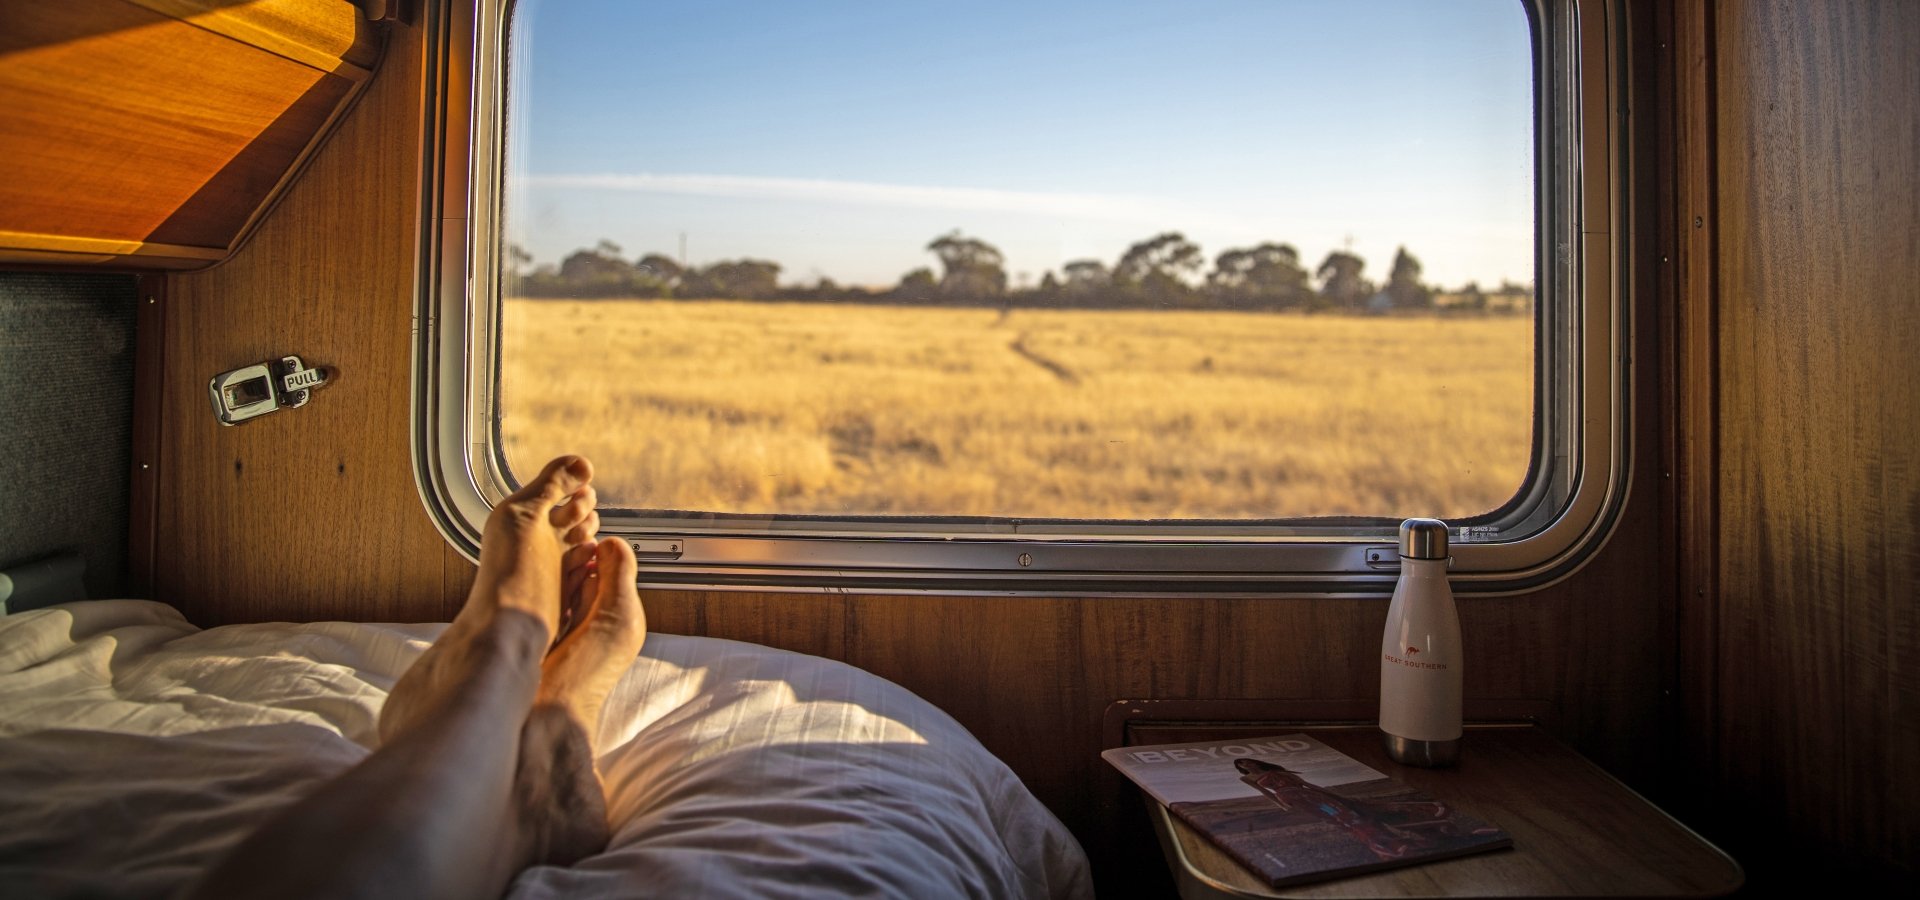 What vacations include travel by sleeper train?